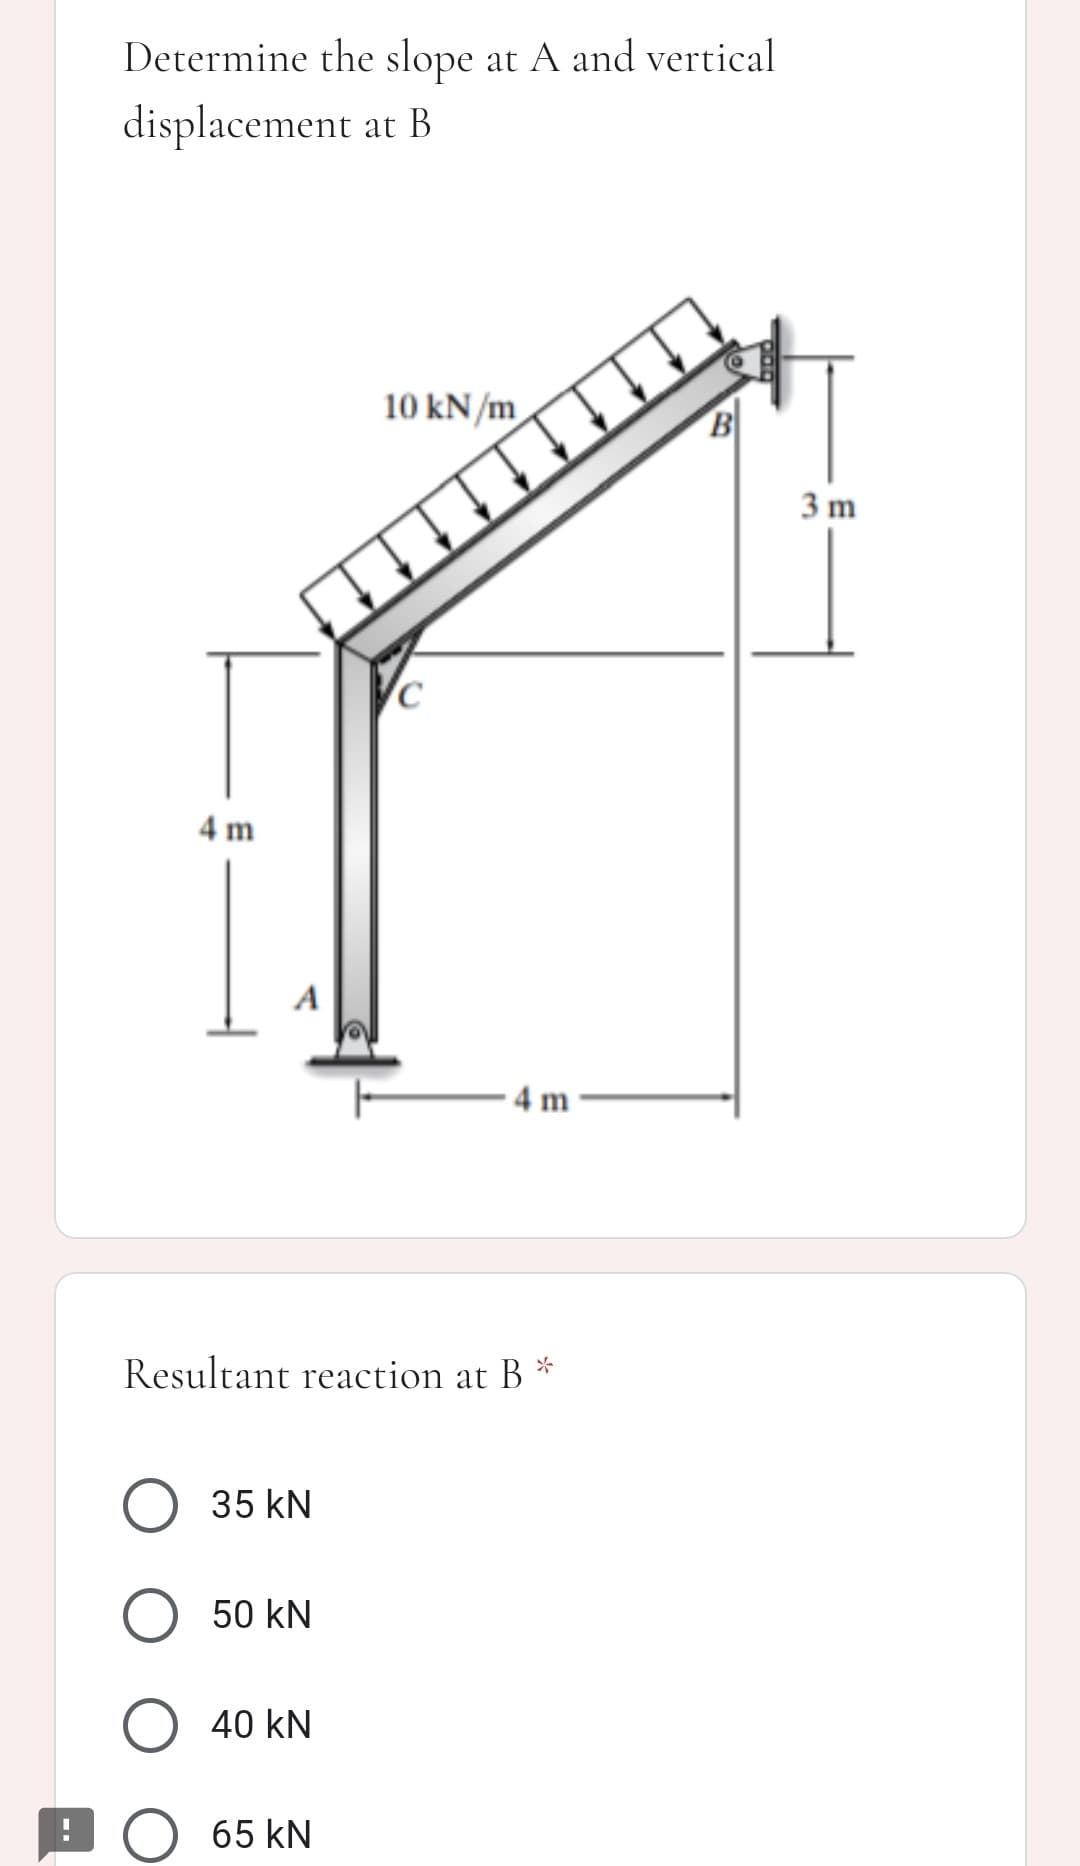 Determine the slope at A and vertical
displacement at B
10 kN/m
B
3 m
4 m
· 4 m
Resultant reaction at B *
O 35 kN
50 kN
O 40 kN
DO 65 kN
